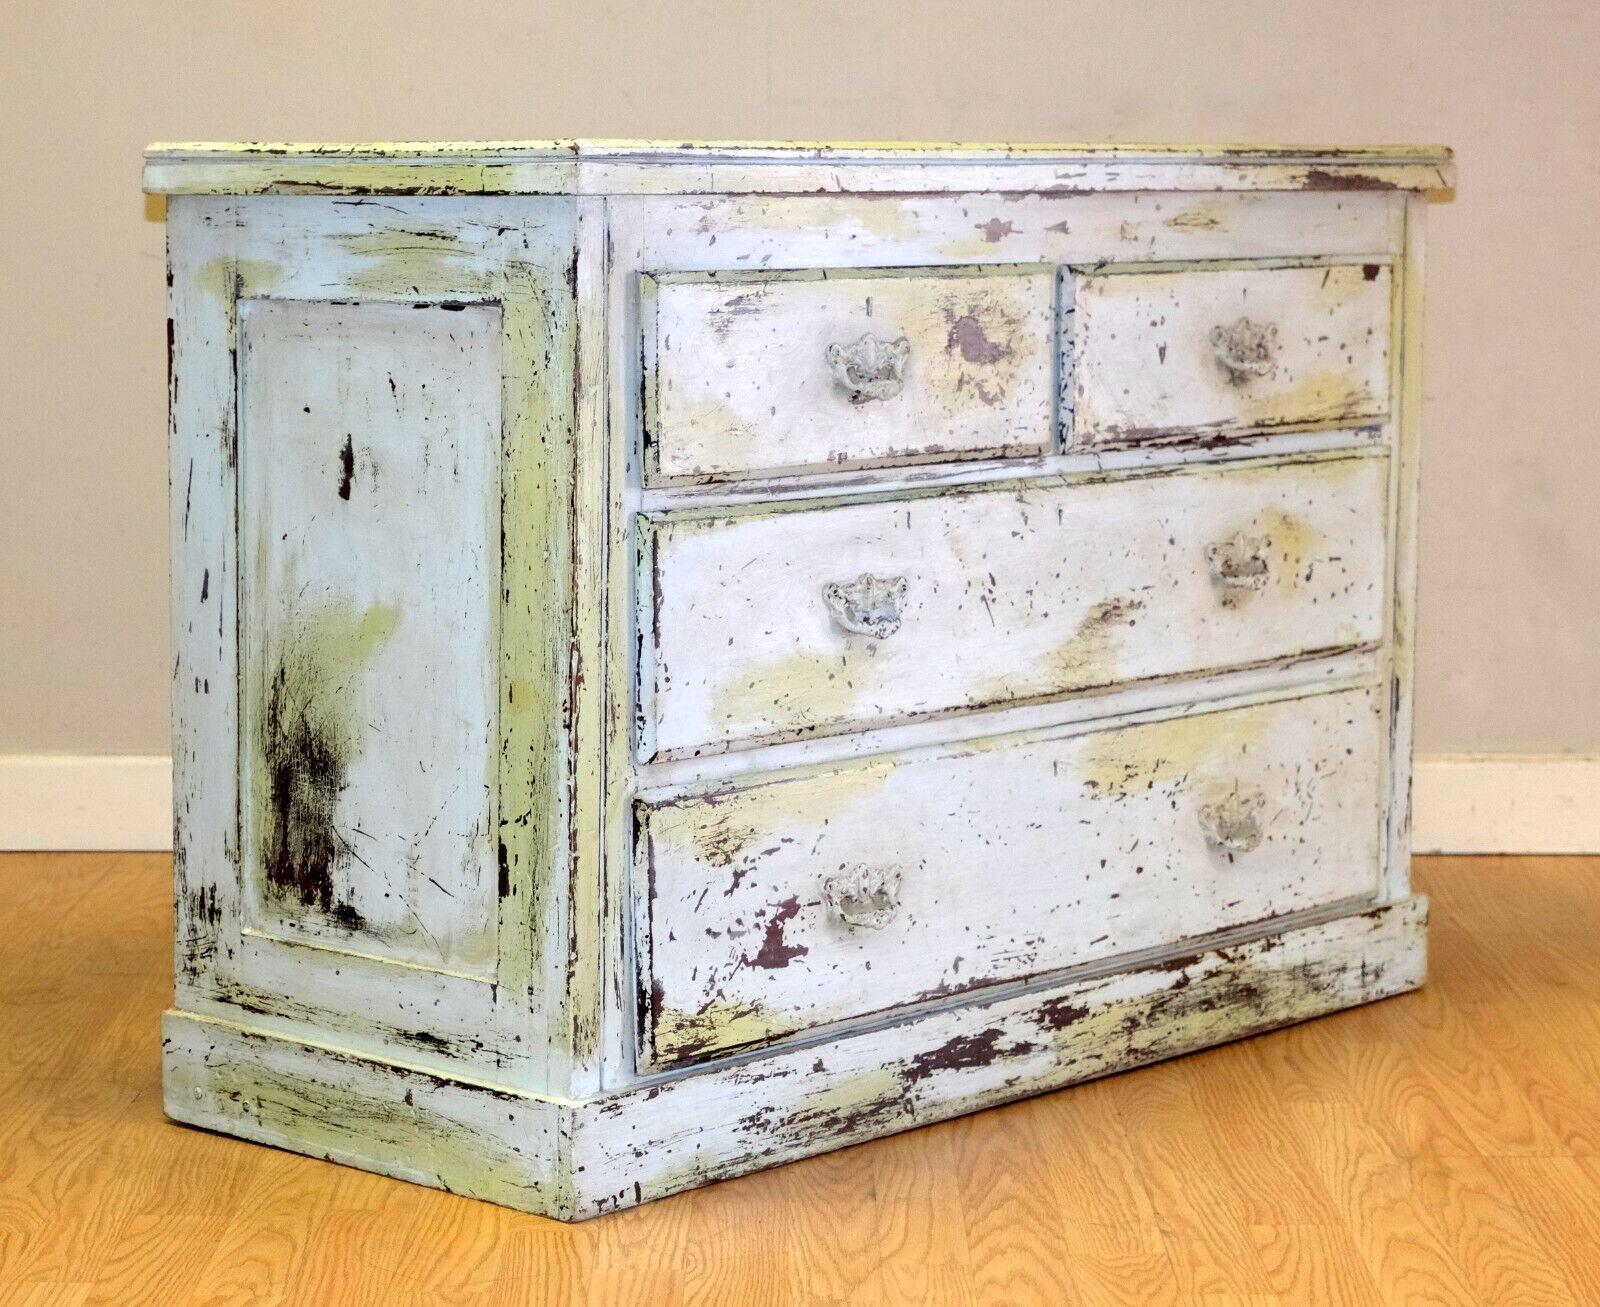 We are delighted to offer for sale this charming antique Victorian French painted chest of drawers with lovely handles.

This beautiful piece has a lot of character and charm with its original, rustic appeal that is so desirable. The chest has four